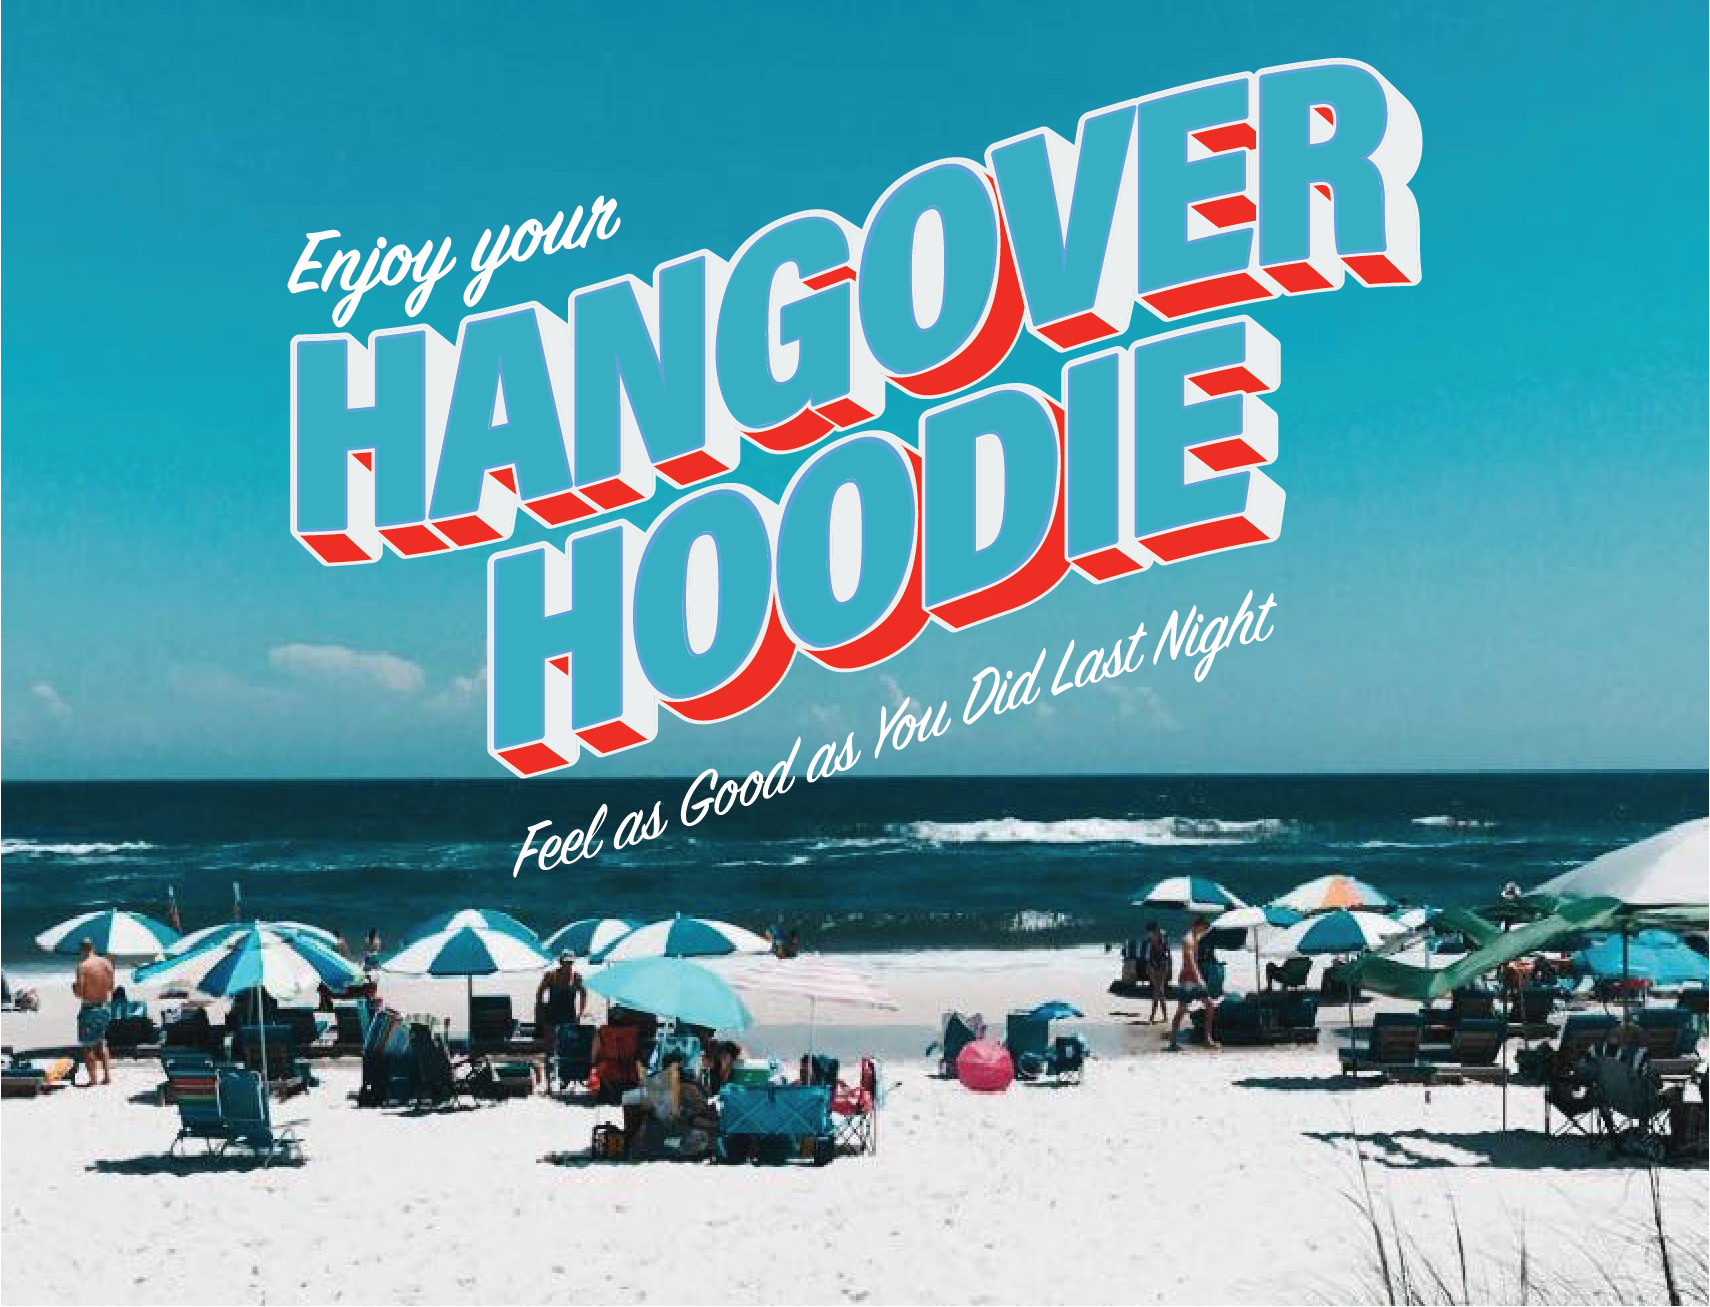 Your Hangover Hoodie Playlist